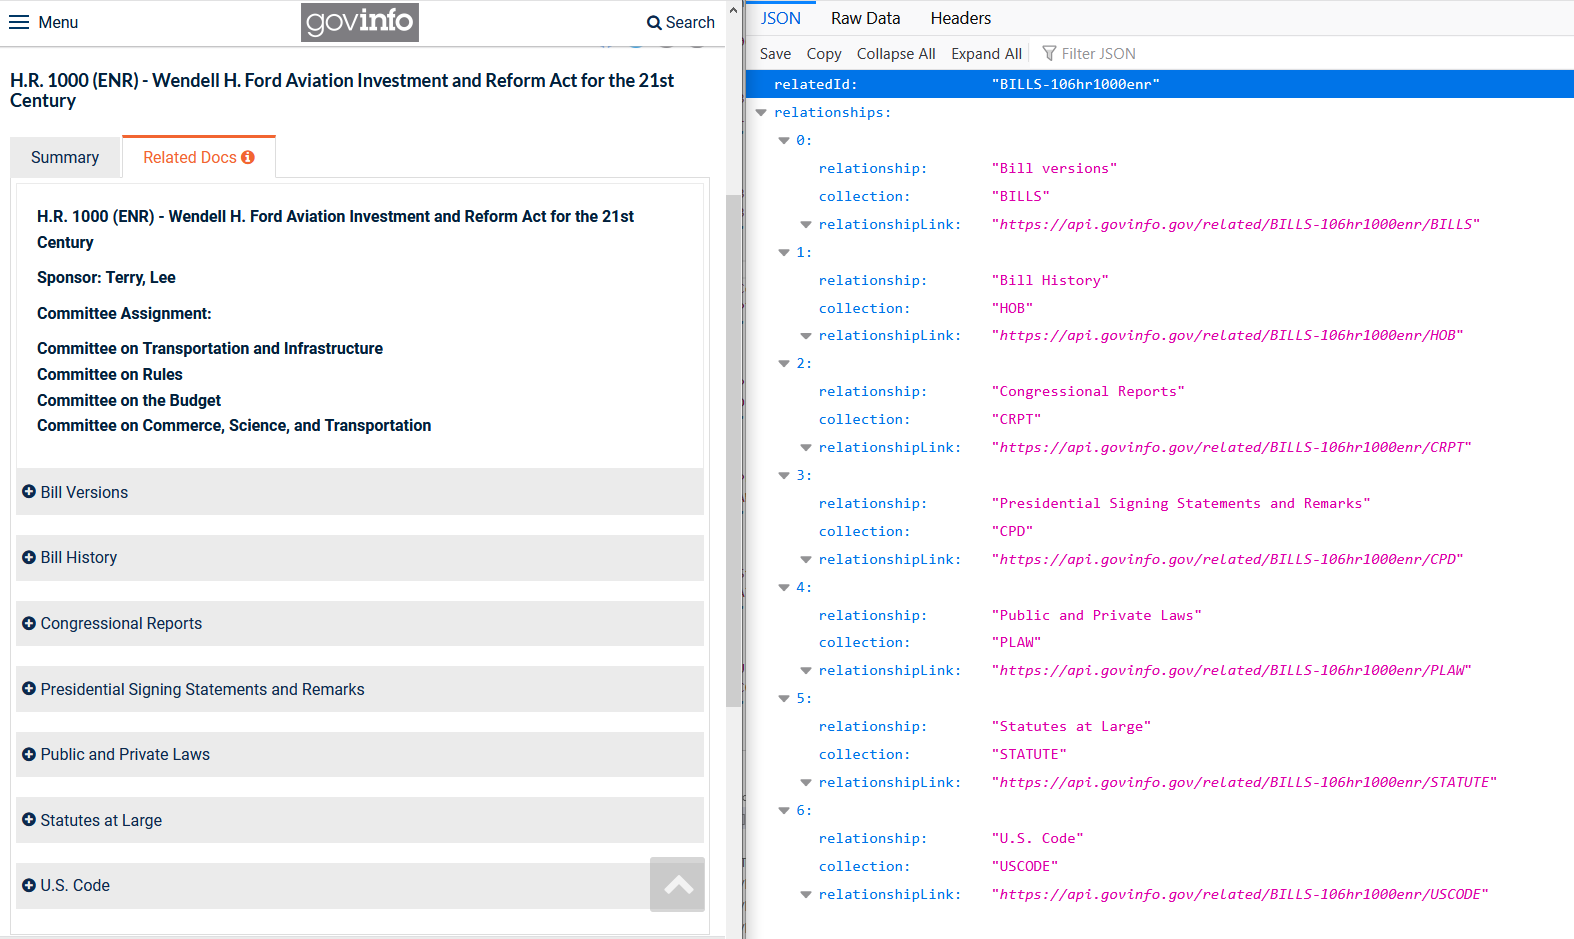 side-by-side screenshot showing the related documents feature on the GovInfo website and the equivalent functionality in the GovInfo API